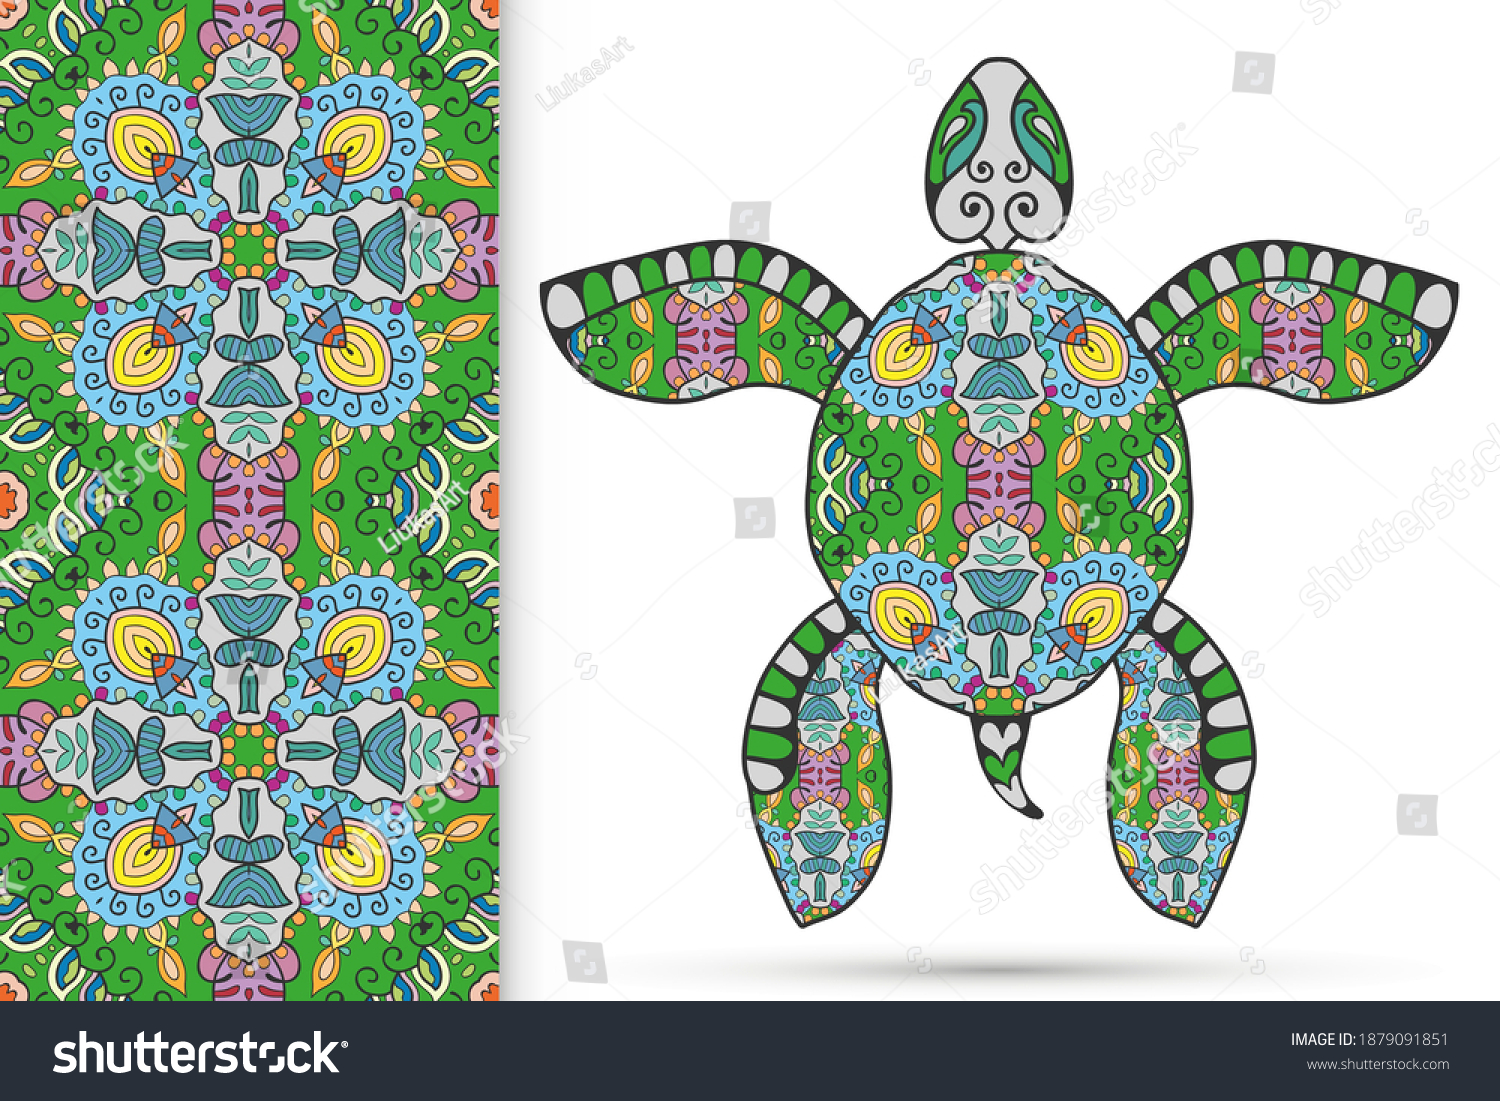 SVG of Decorative doodle turtle with ornament and colorful seamless hand drawn pattern. Tribal totem animal, isolated element for scrapbook, invitation card, book cover design, textile fabric print svg